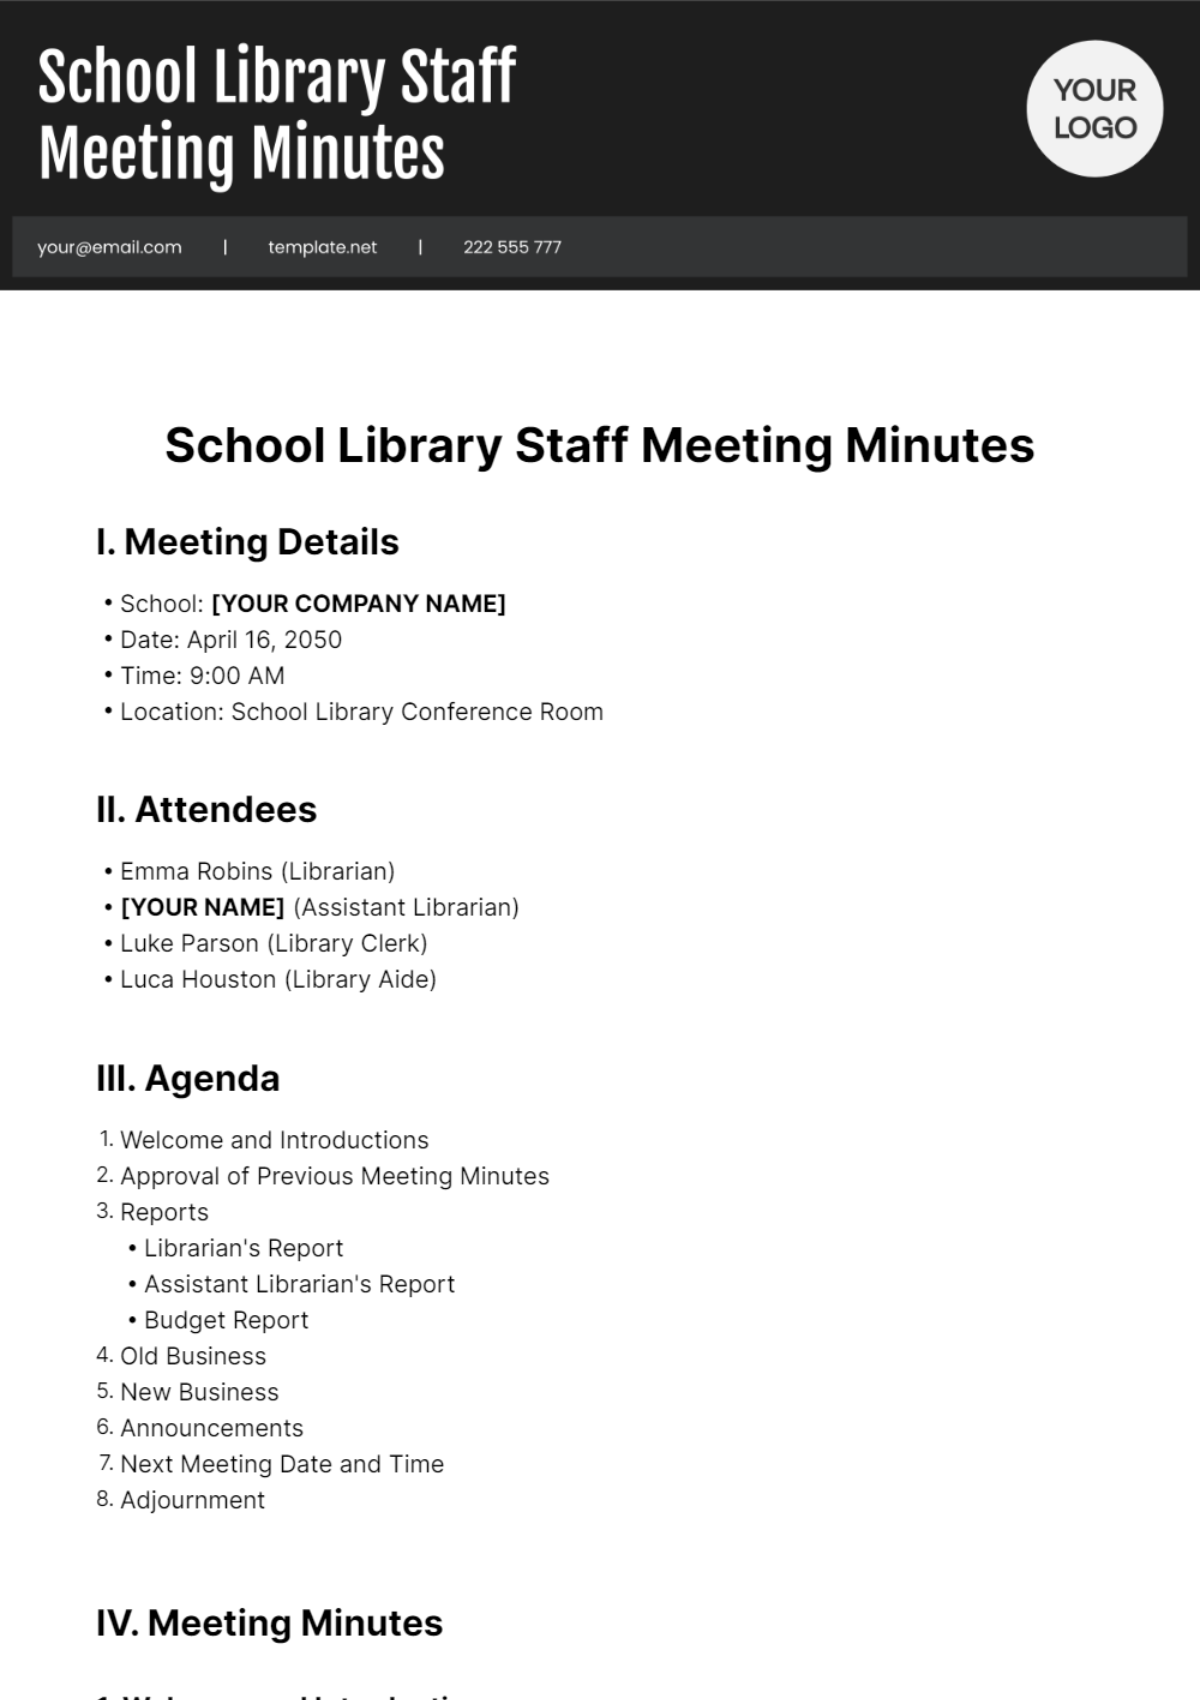 School Library Staff Meeting Minutes Template